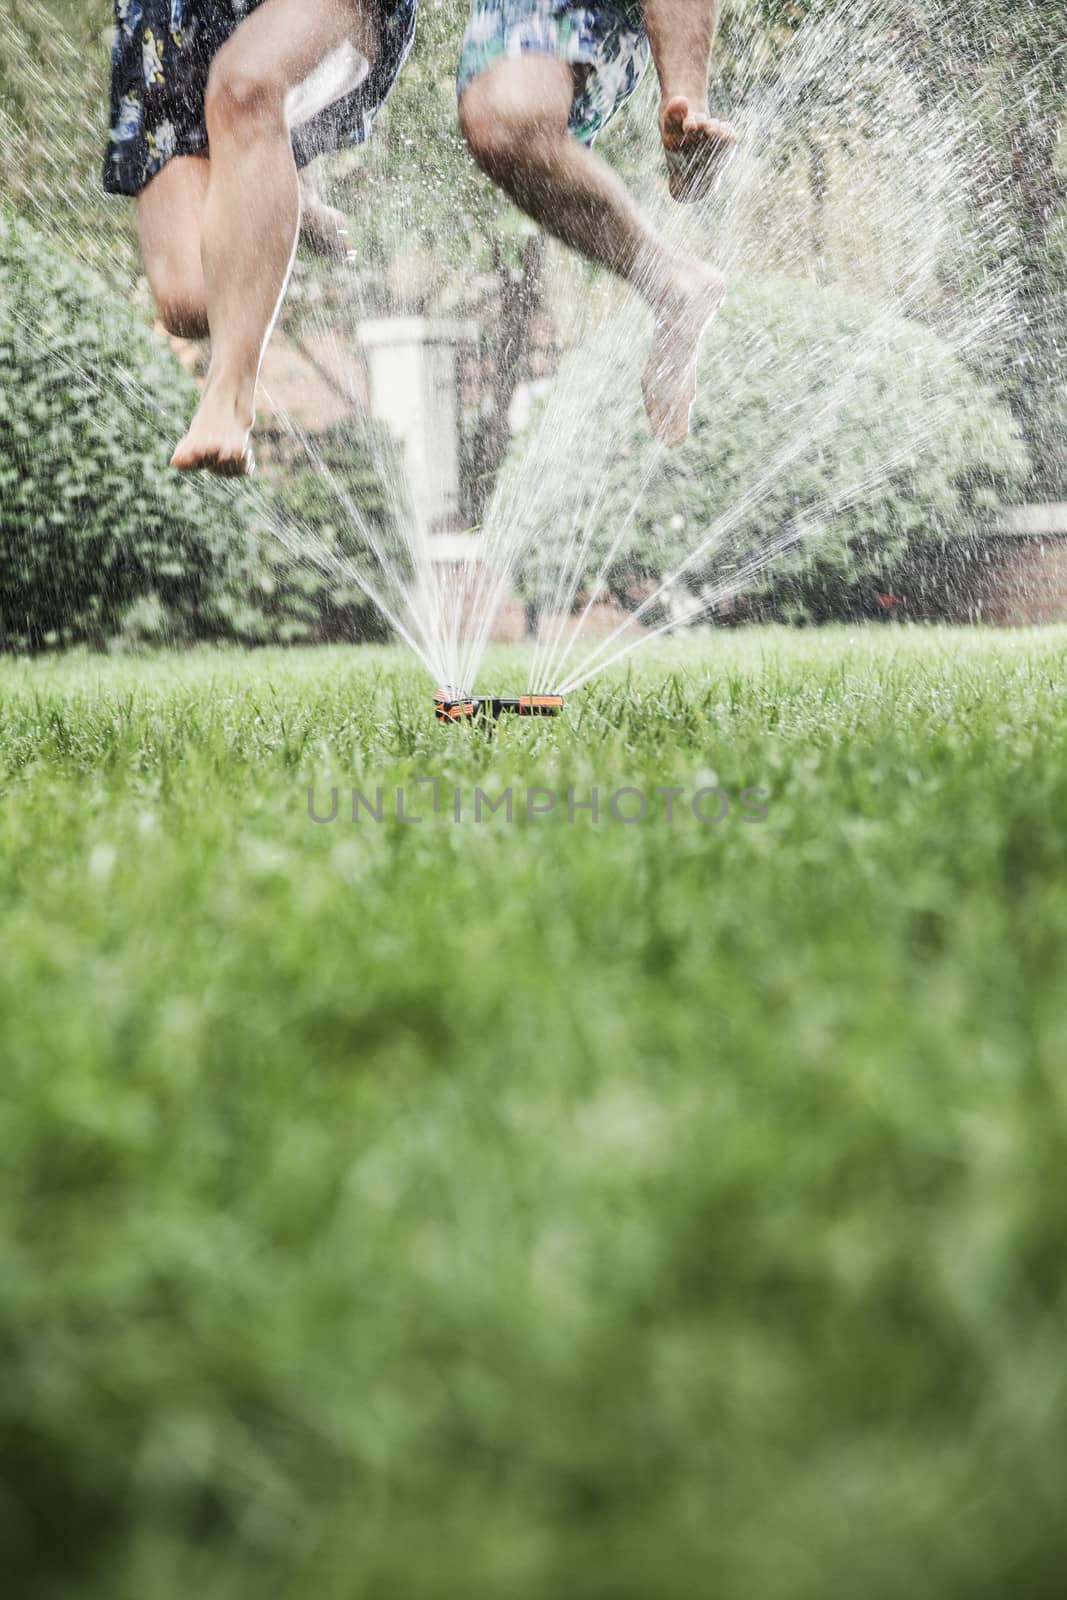 Two people jumping through a sprinkler, mid-air, surface level shot by XiXinXing